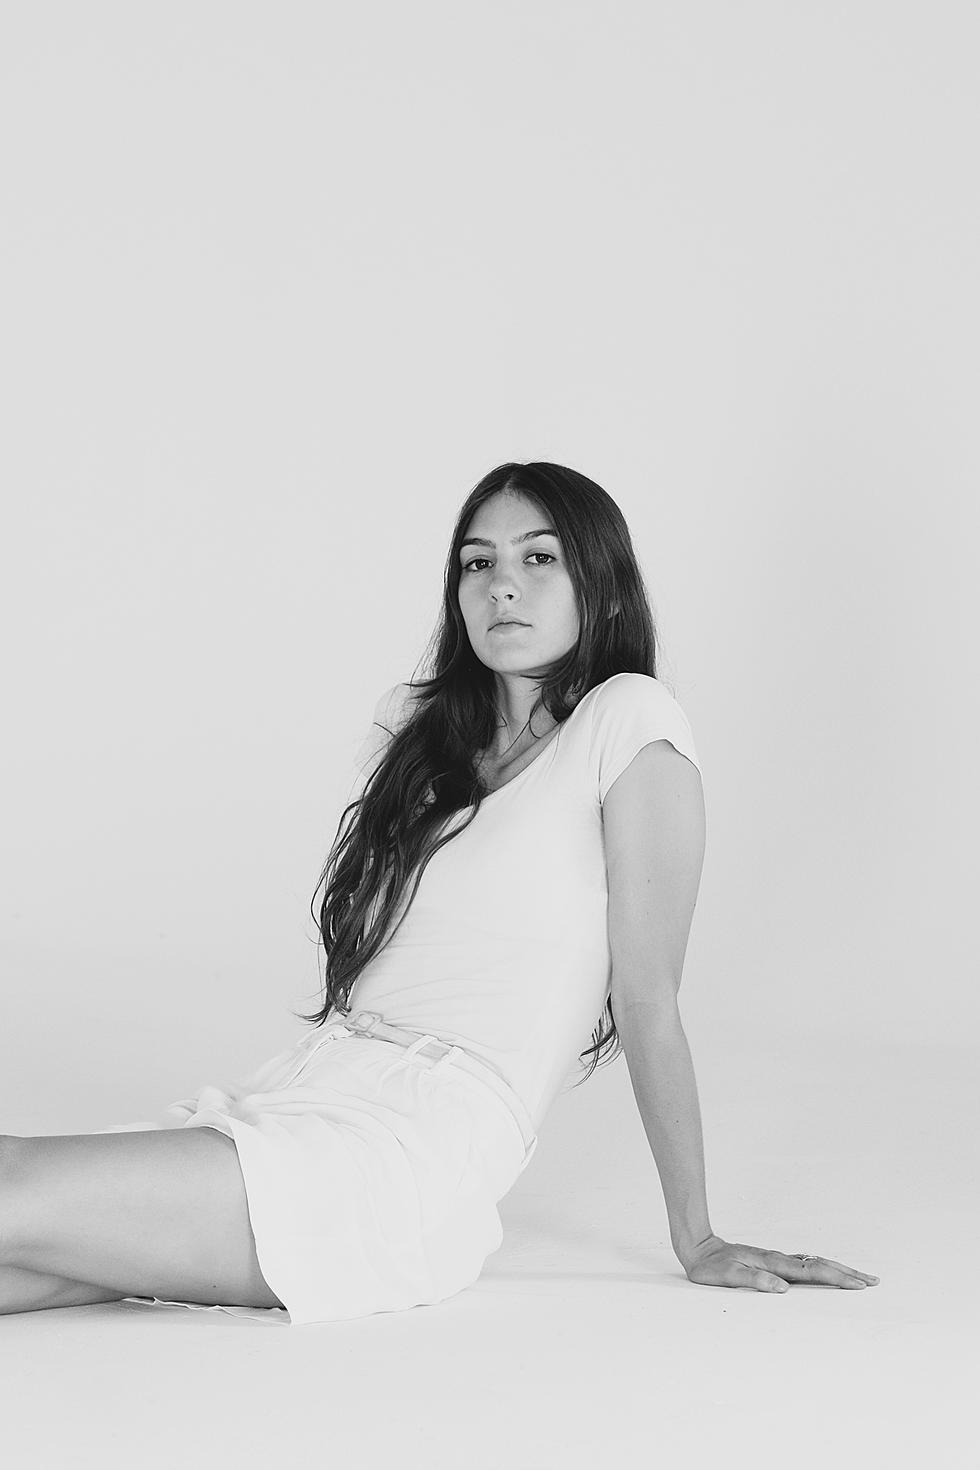 listen to Weyes Blood’s new single “Do You Need My Love”